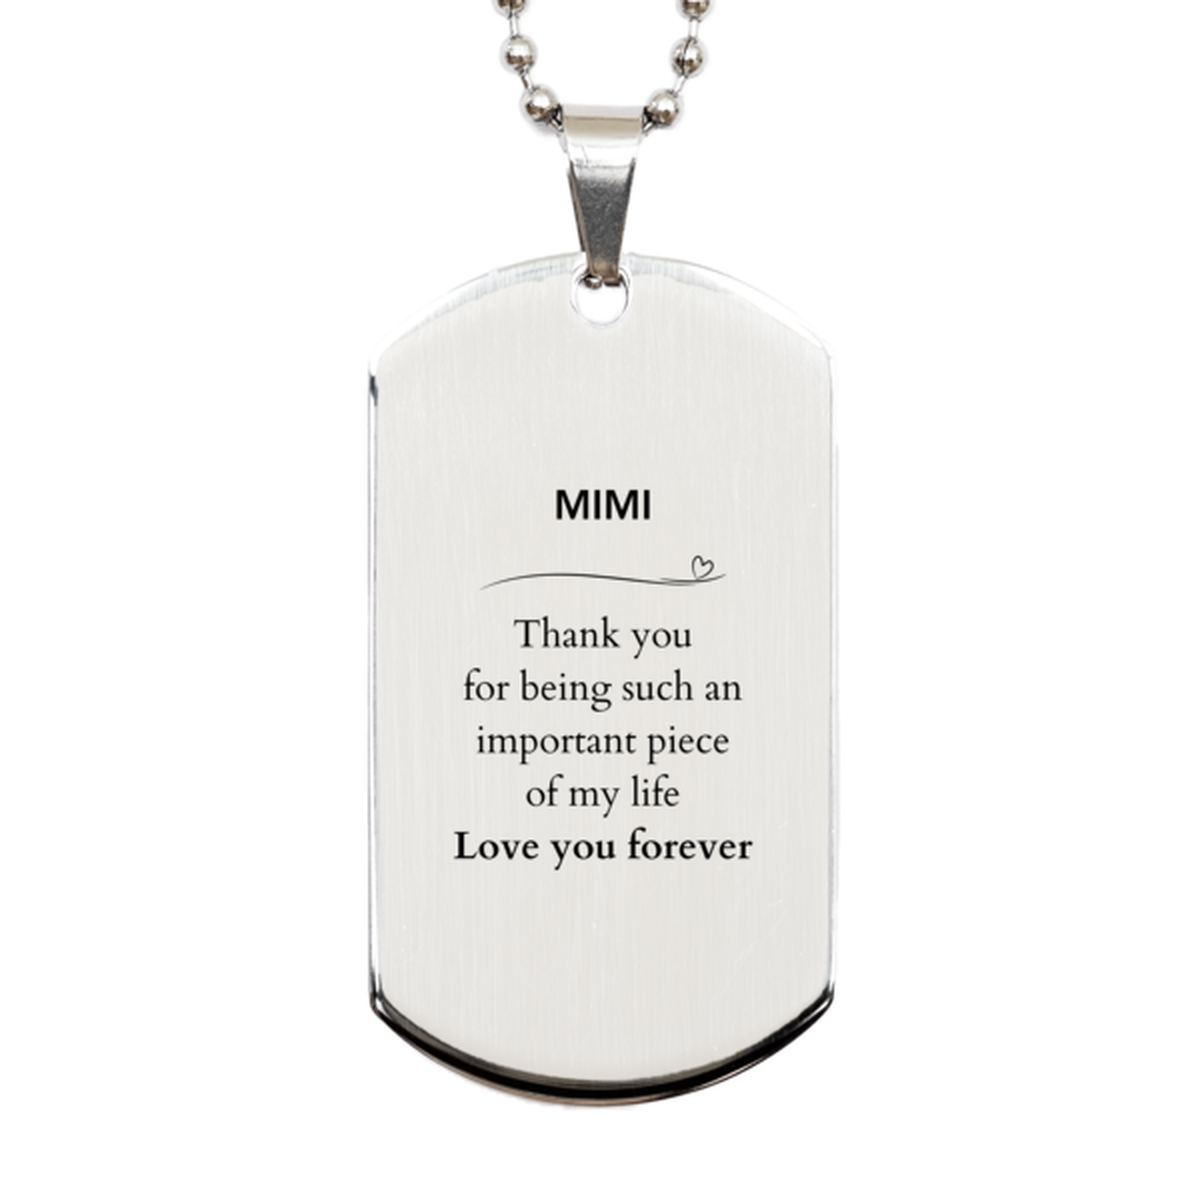 Appropriate Mimi Silver Dog Tag Epic Birthday Gifts for Mimi Thank you for being such an important piece of my life Mimi Christmas Mothers Fathers Day